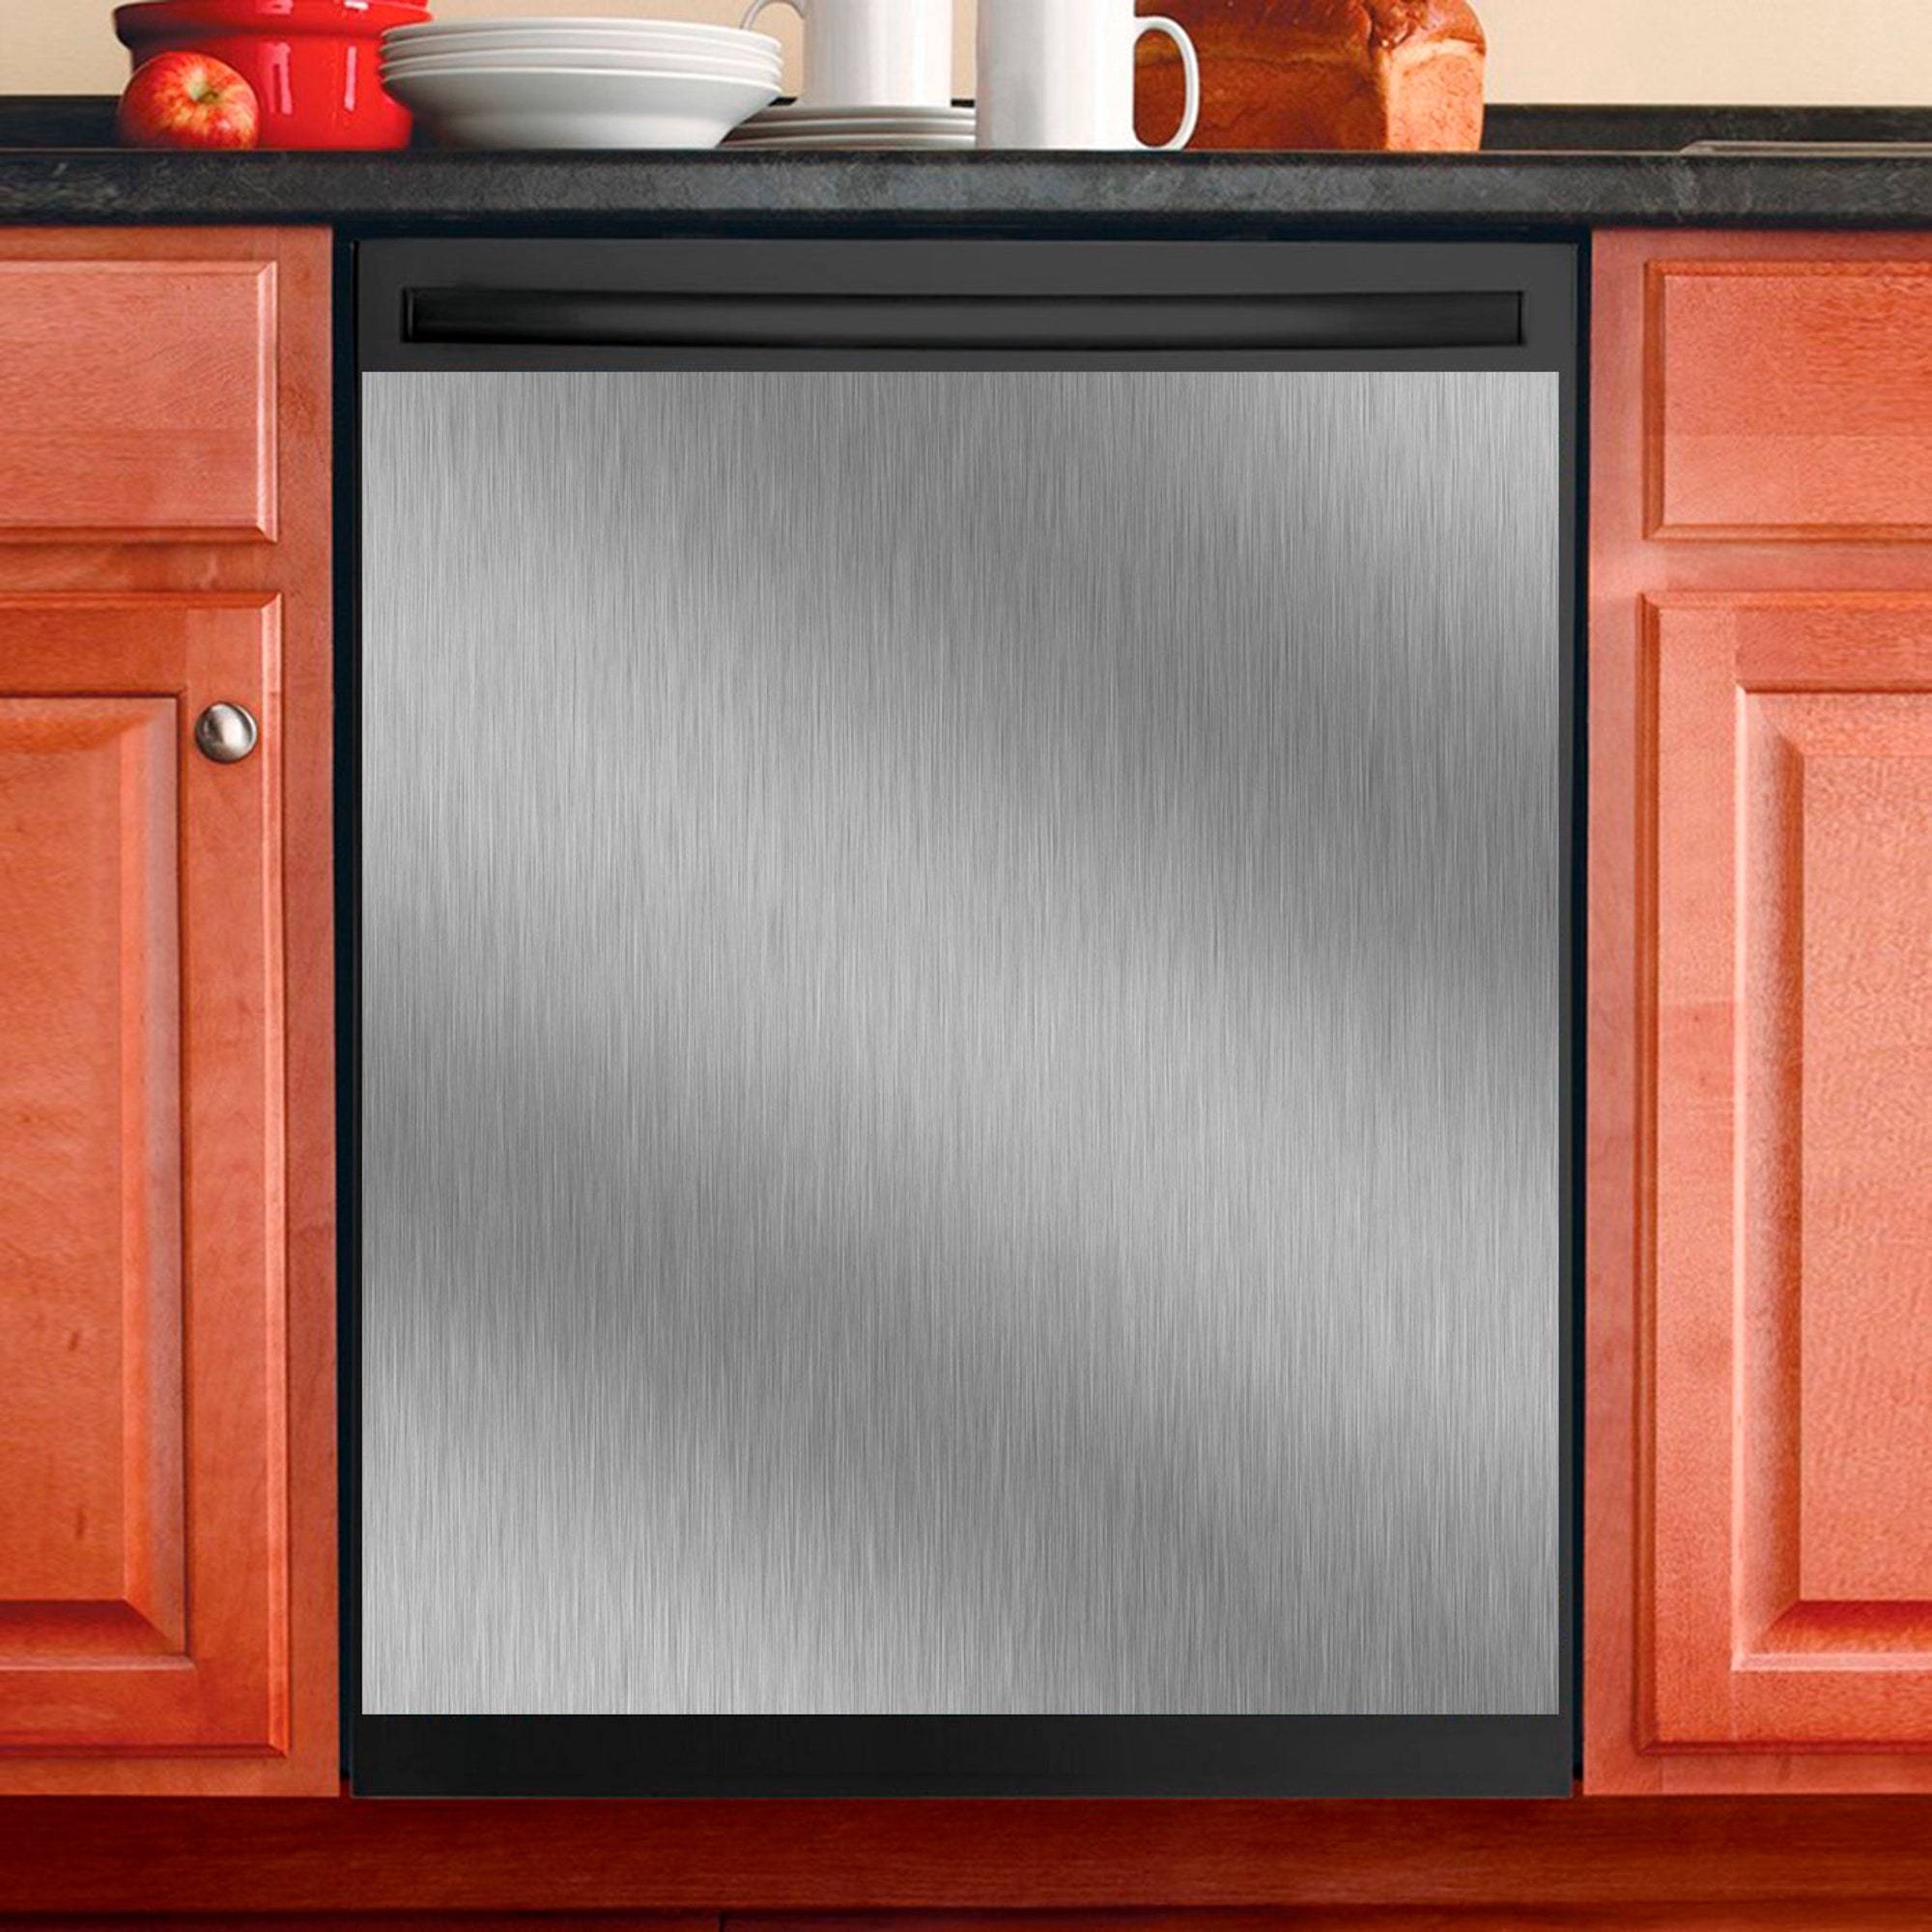 Stainless Steel Dishwasher Magnet Cover